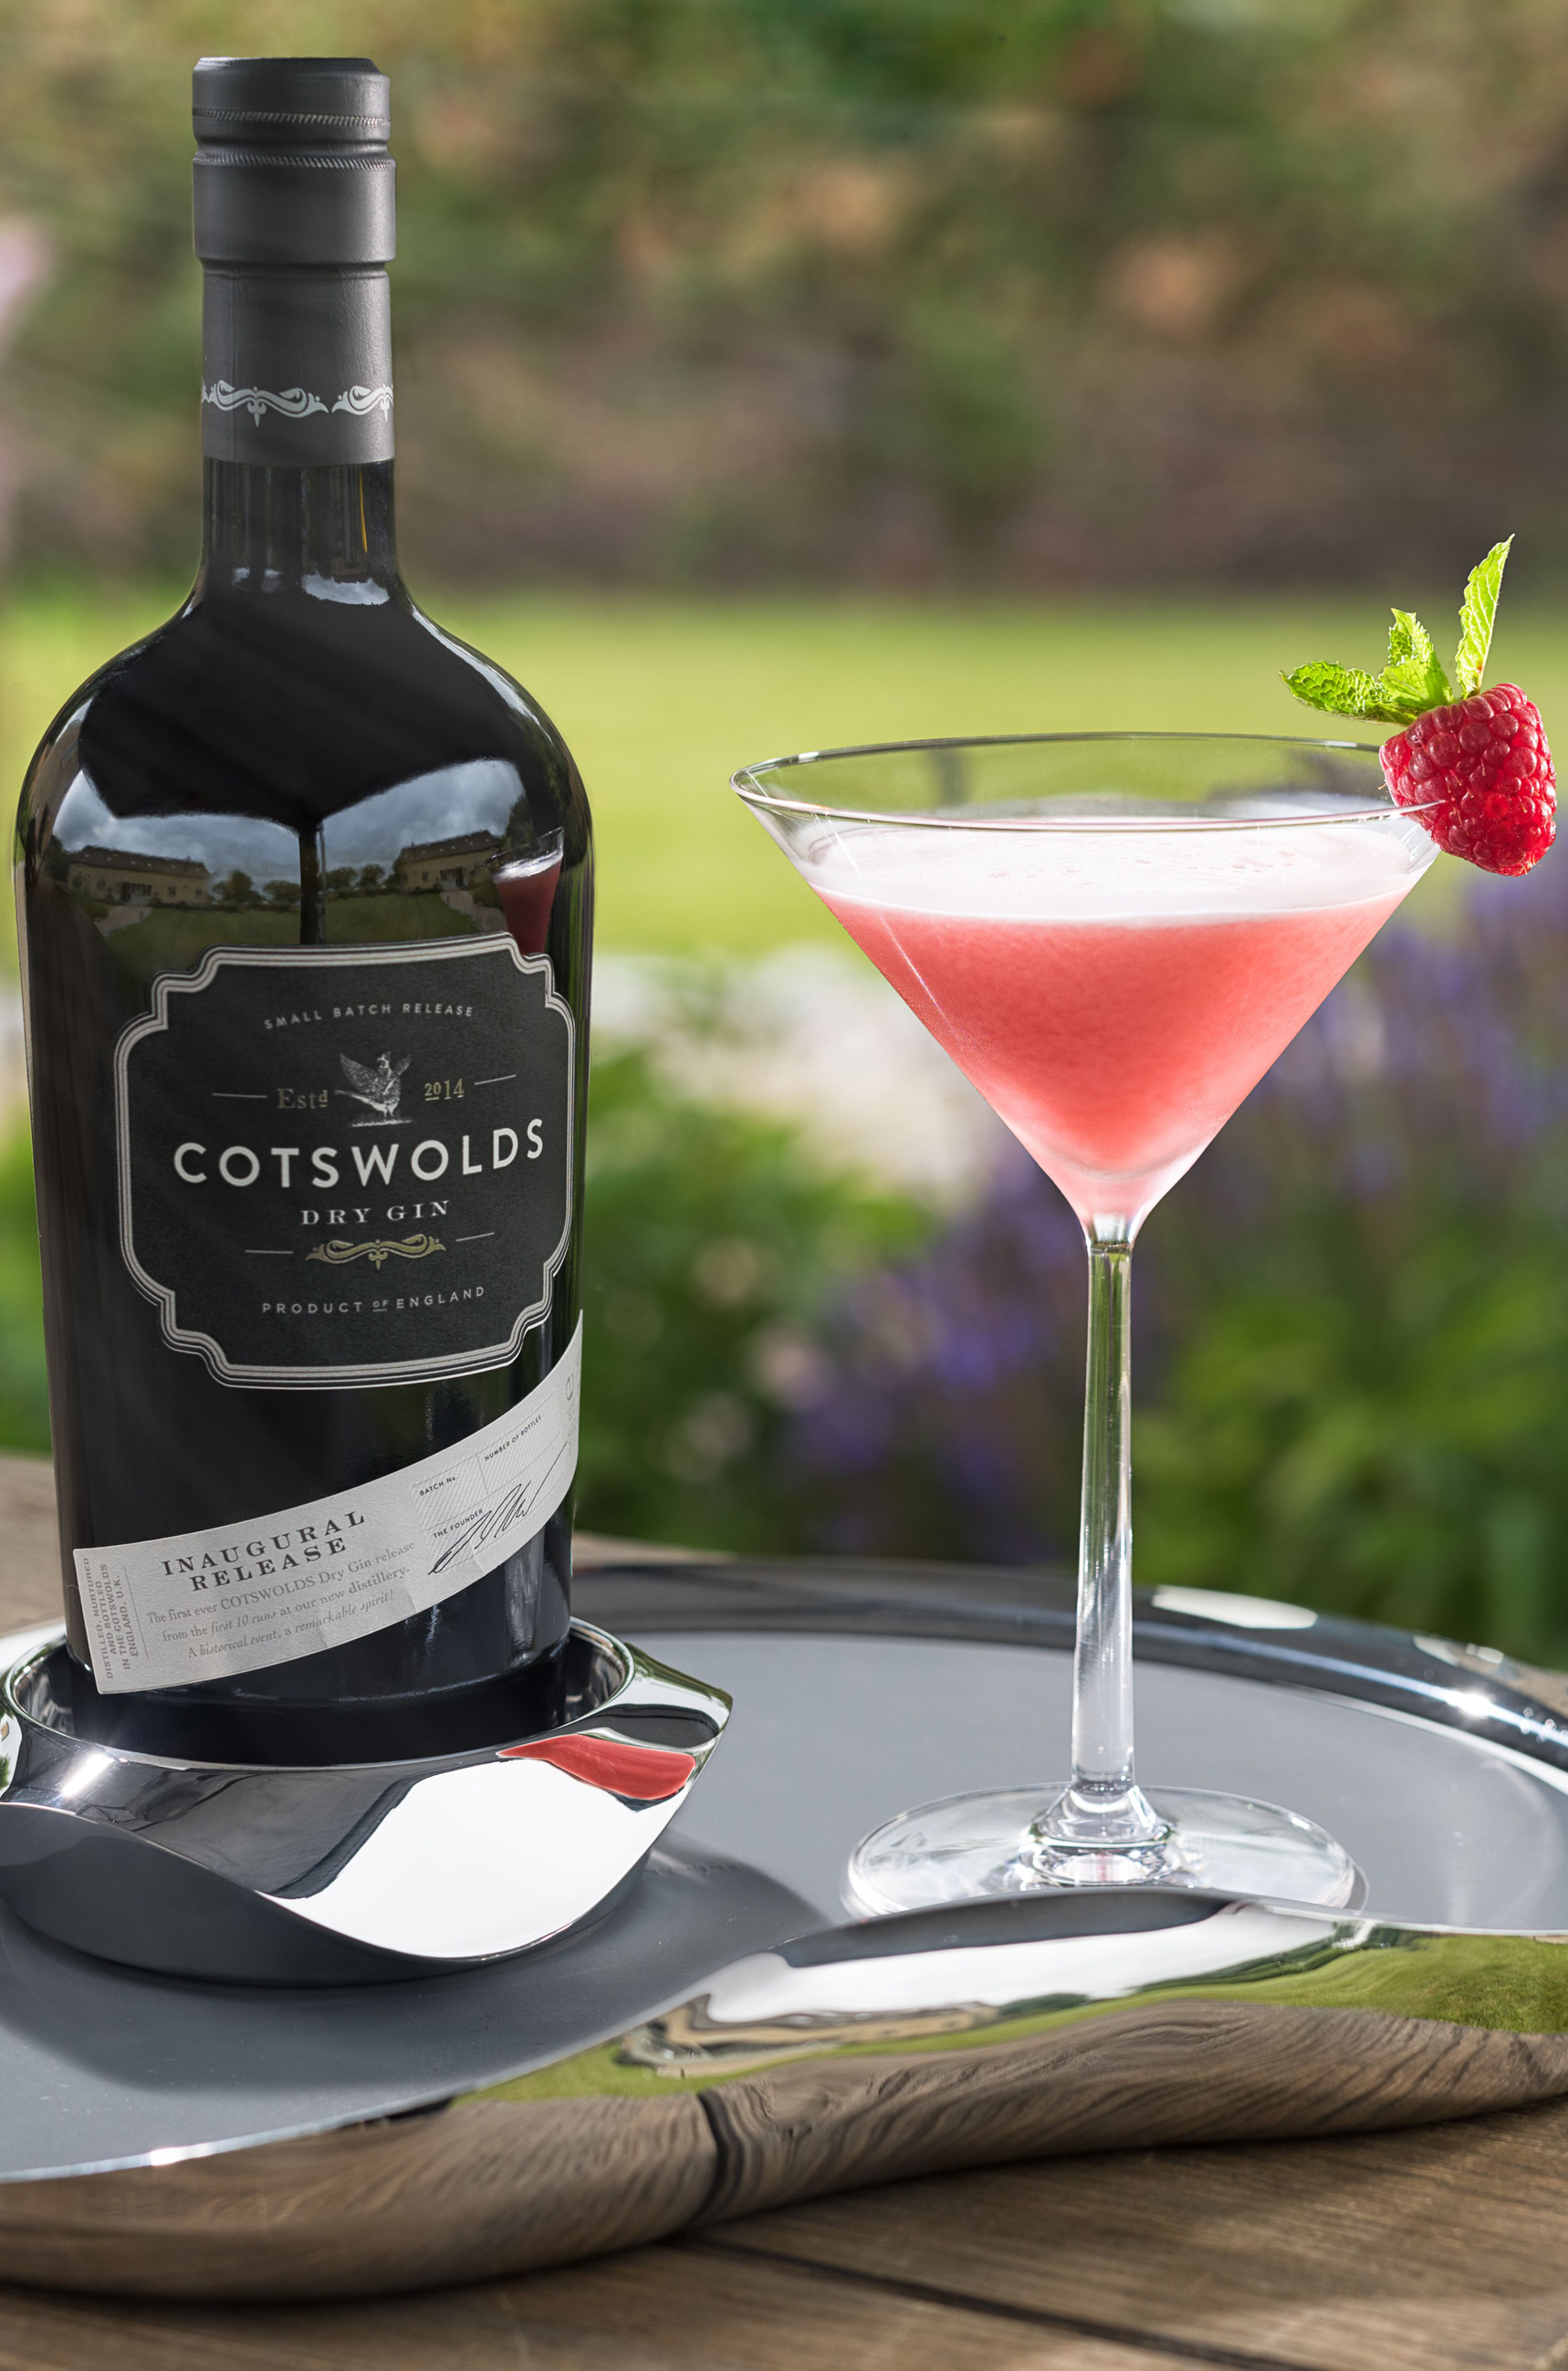 Cloer Leaf cocktail with Cotswoolds dry gin